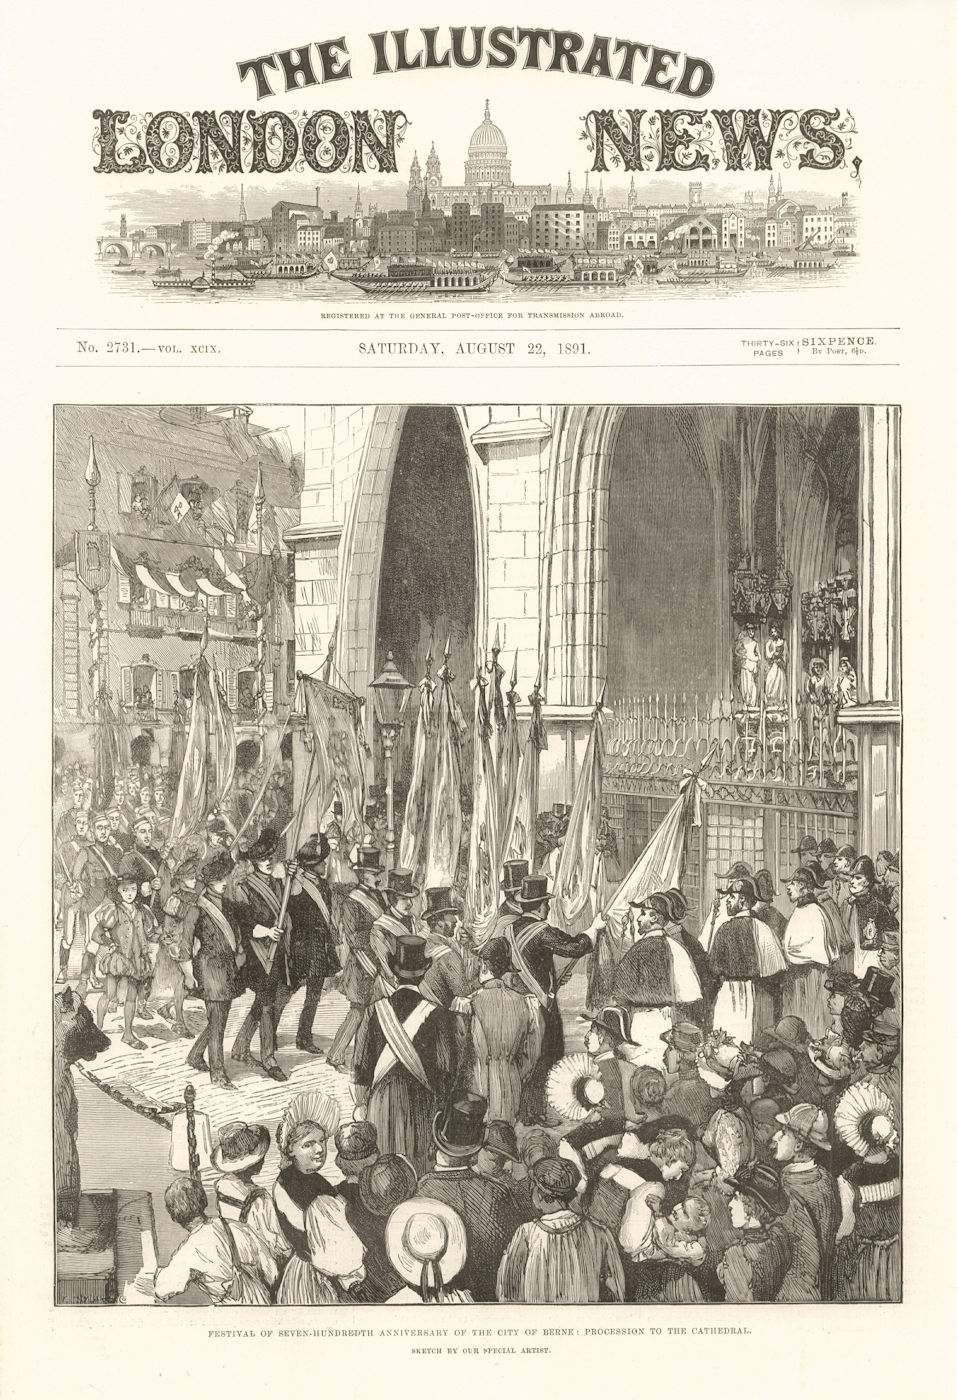 Associate Product City of Berne 700th anniversary: Procession to the Cathedral. Switzerland 1891